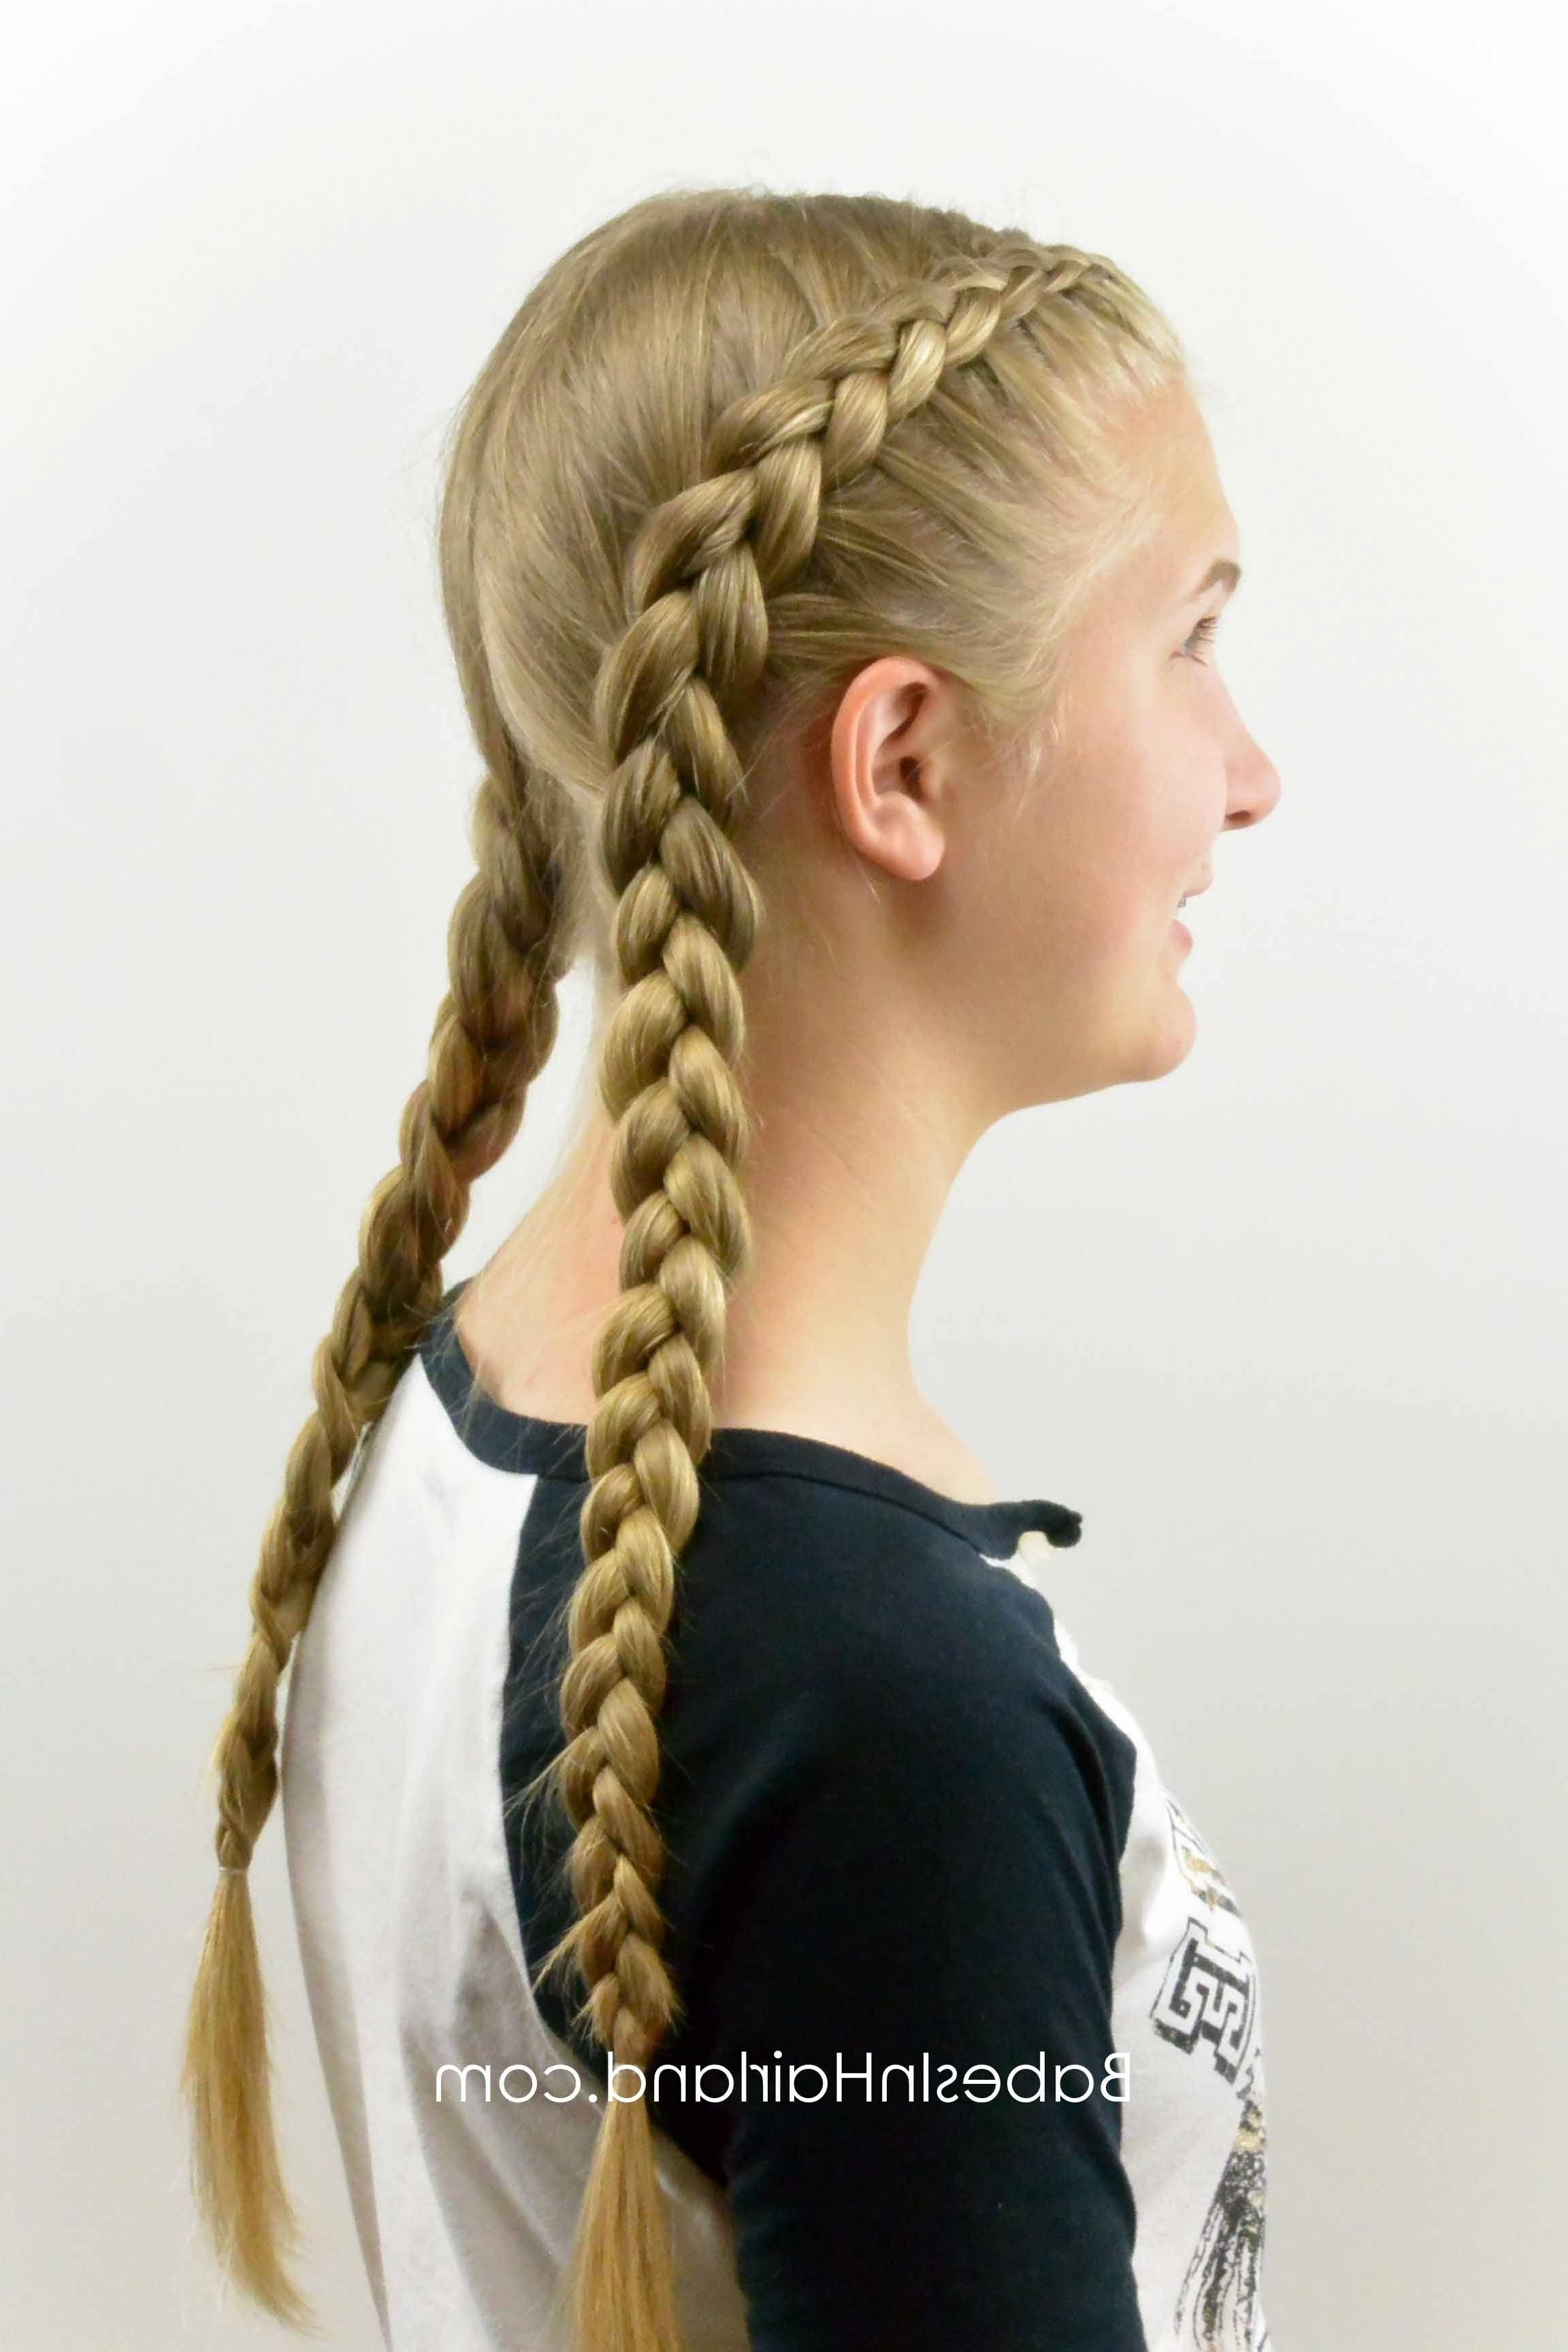 Well Liked Pigtails Braided Hairstyles For How To: Tight Dutch Braids On Yourself – Babes In Hairland (View 15 of 15)